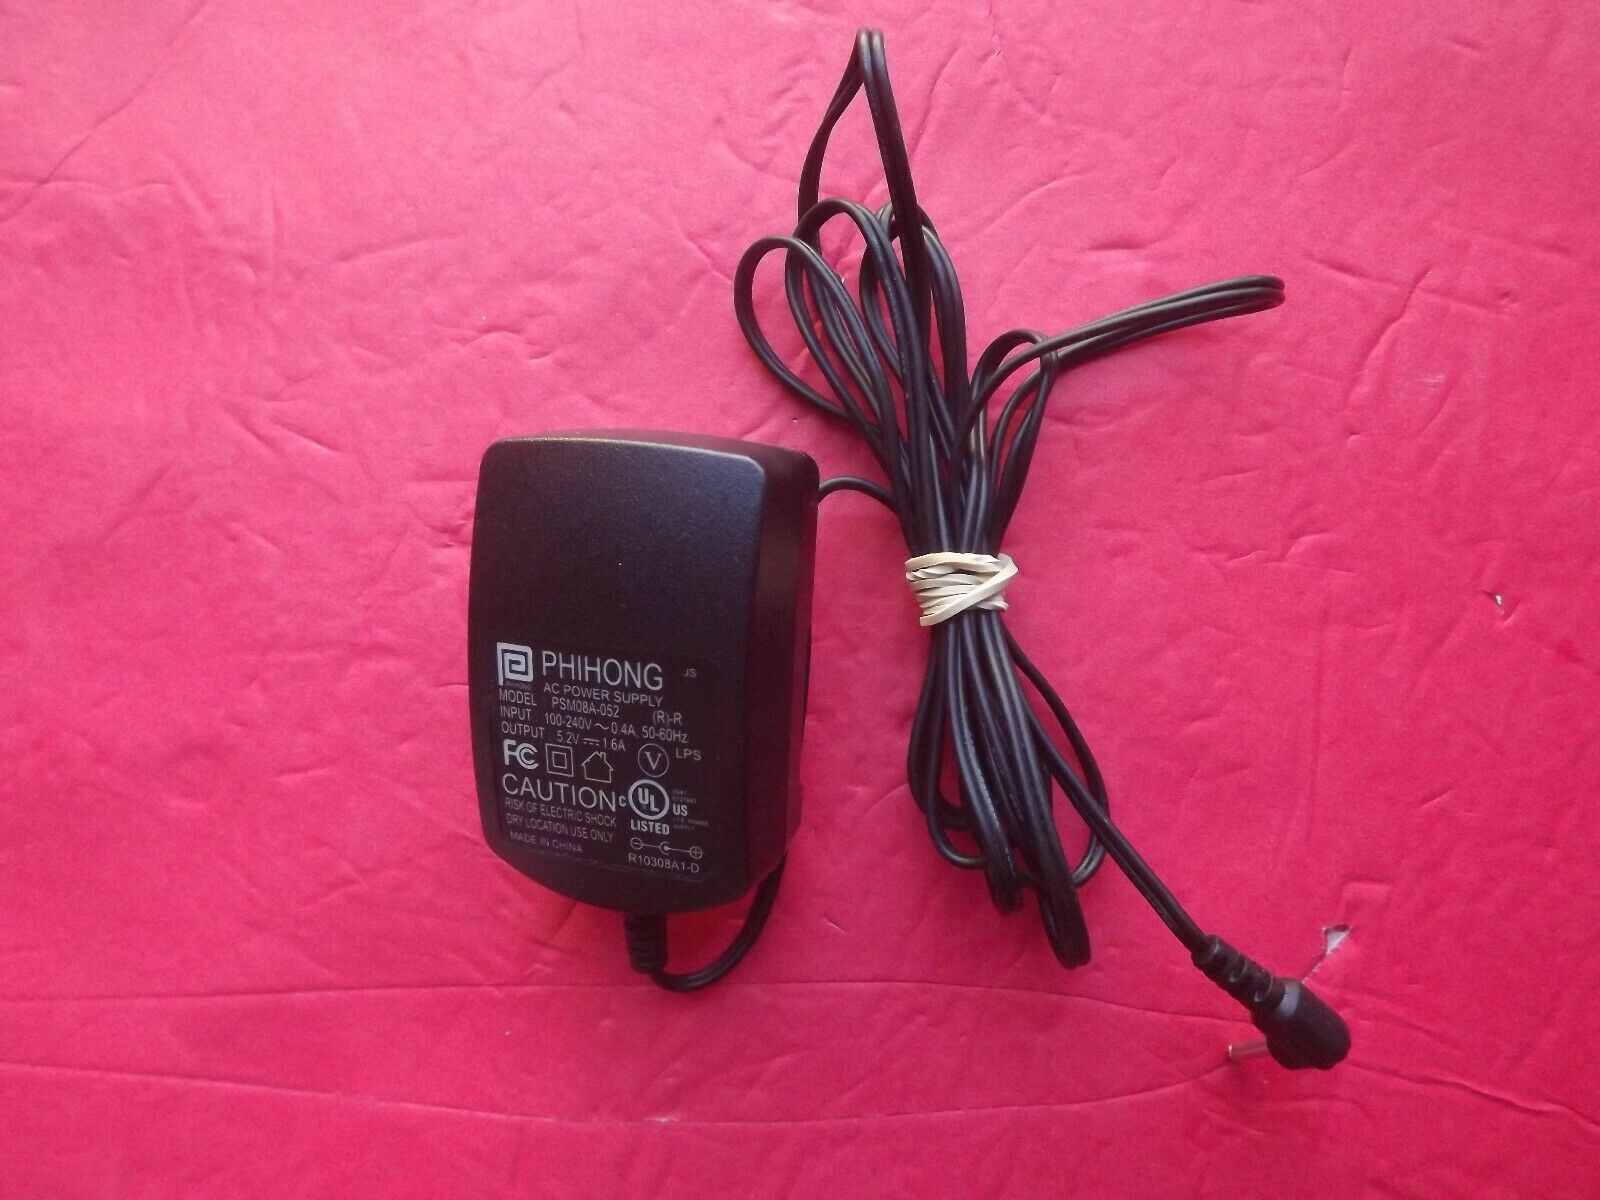 XM INNO1/INNO2 Home Dock AC Power Adapter for Pioneer XM Radio receiver Type: AC Power Adapter P